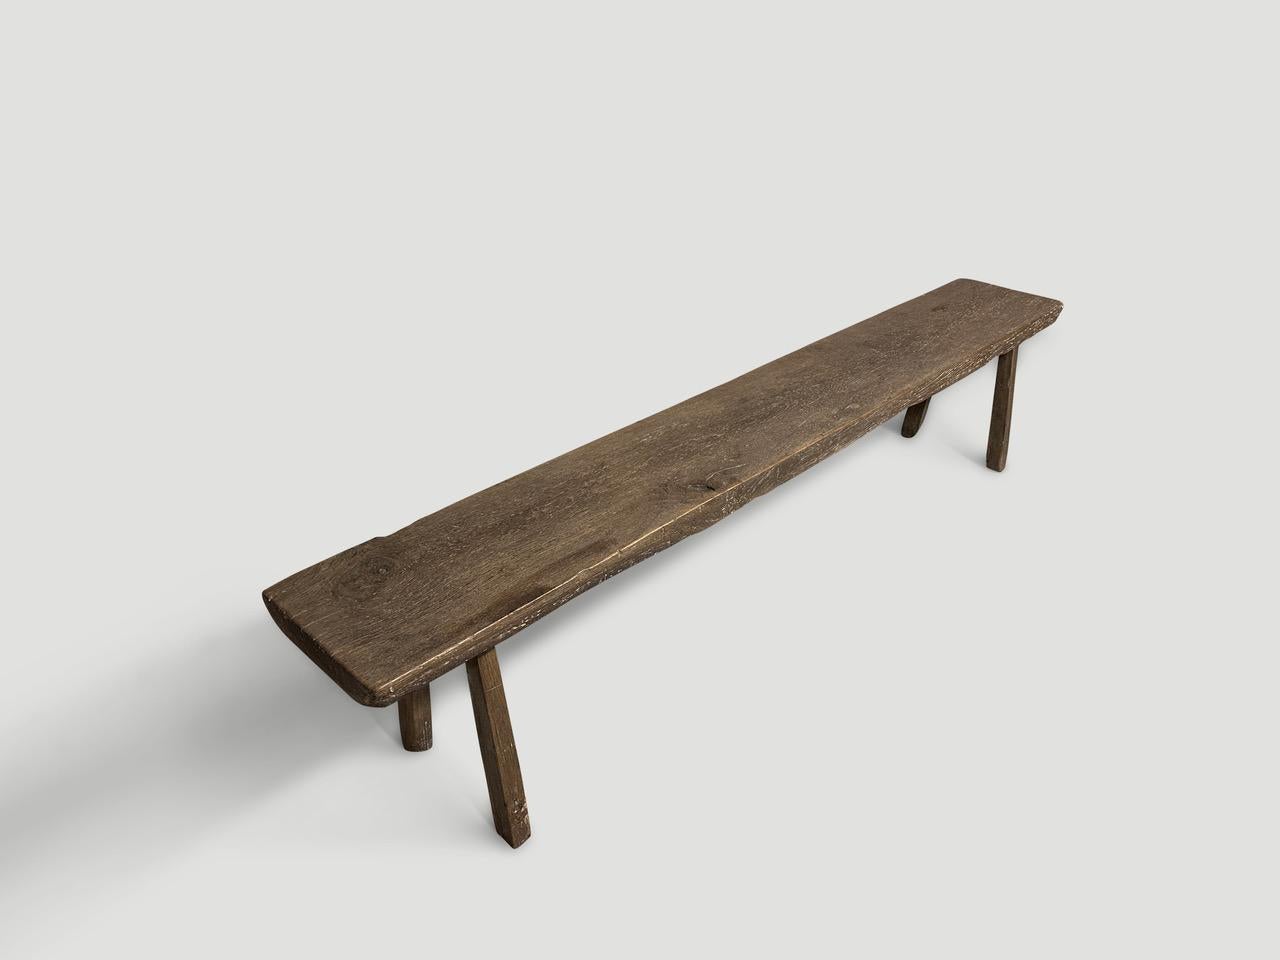 Andrianna Shamaris Antique Teak Wood Bench  In Excellent Condition For Sale In New York, NY